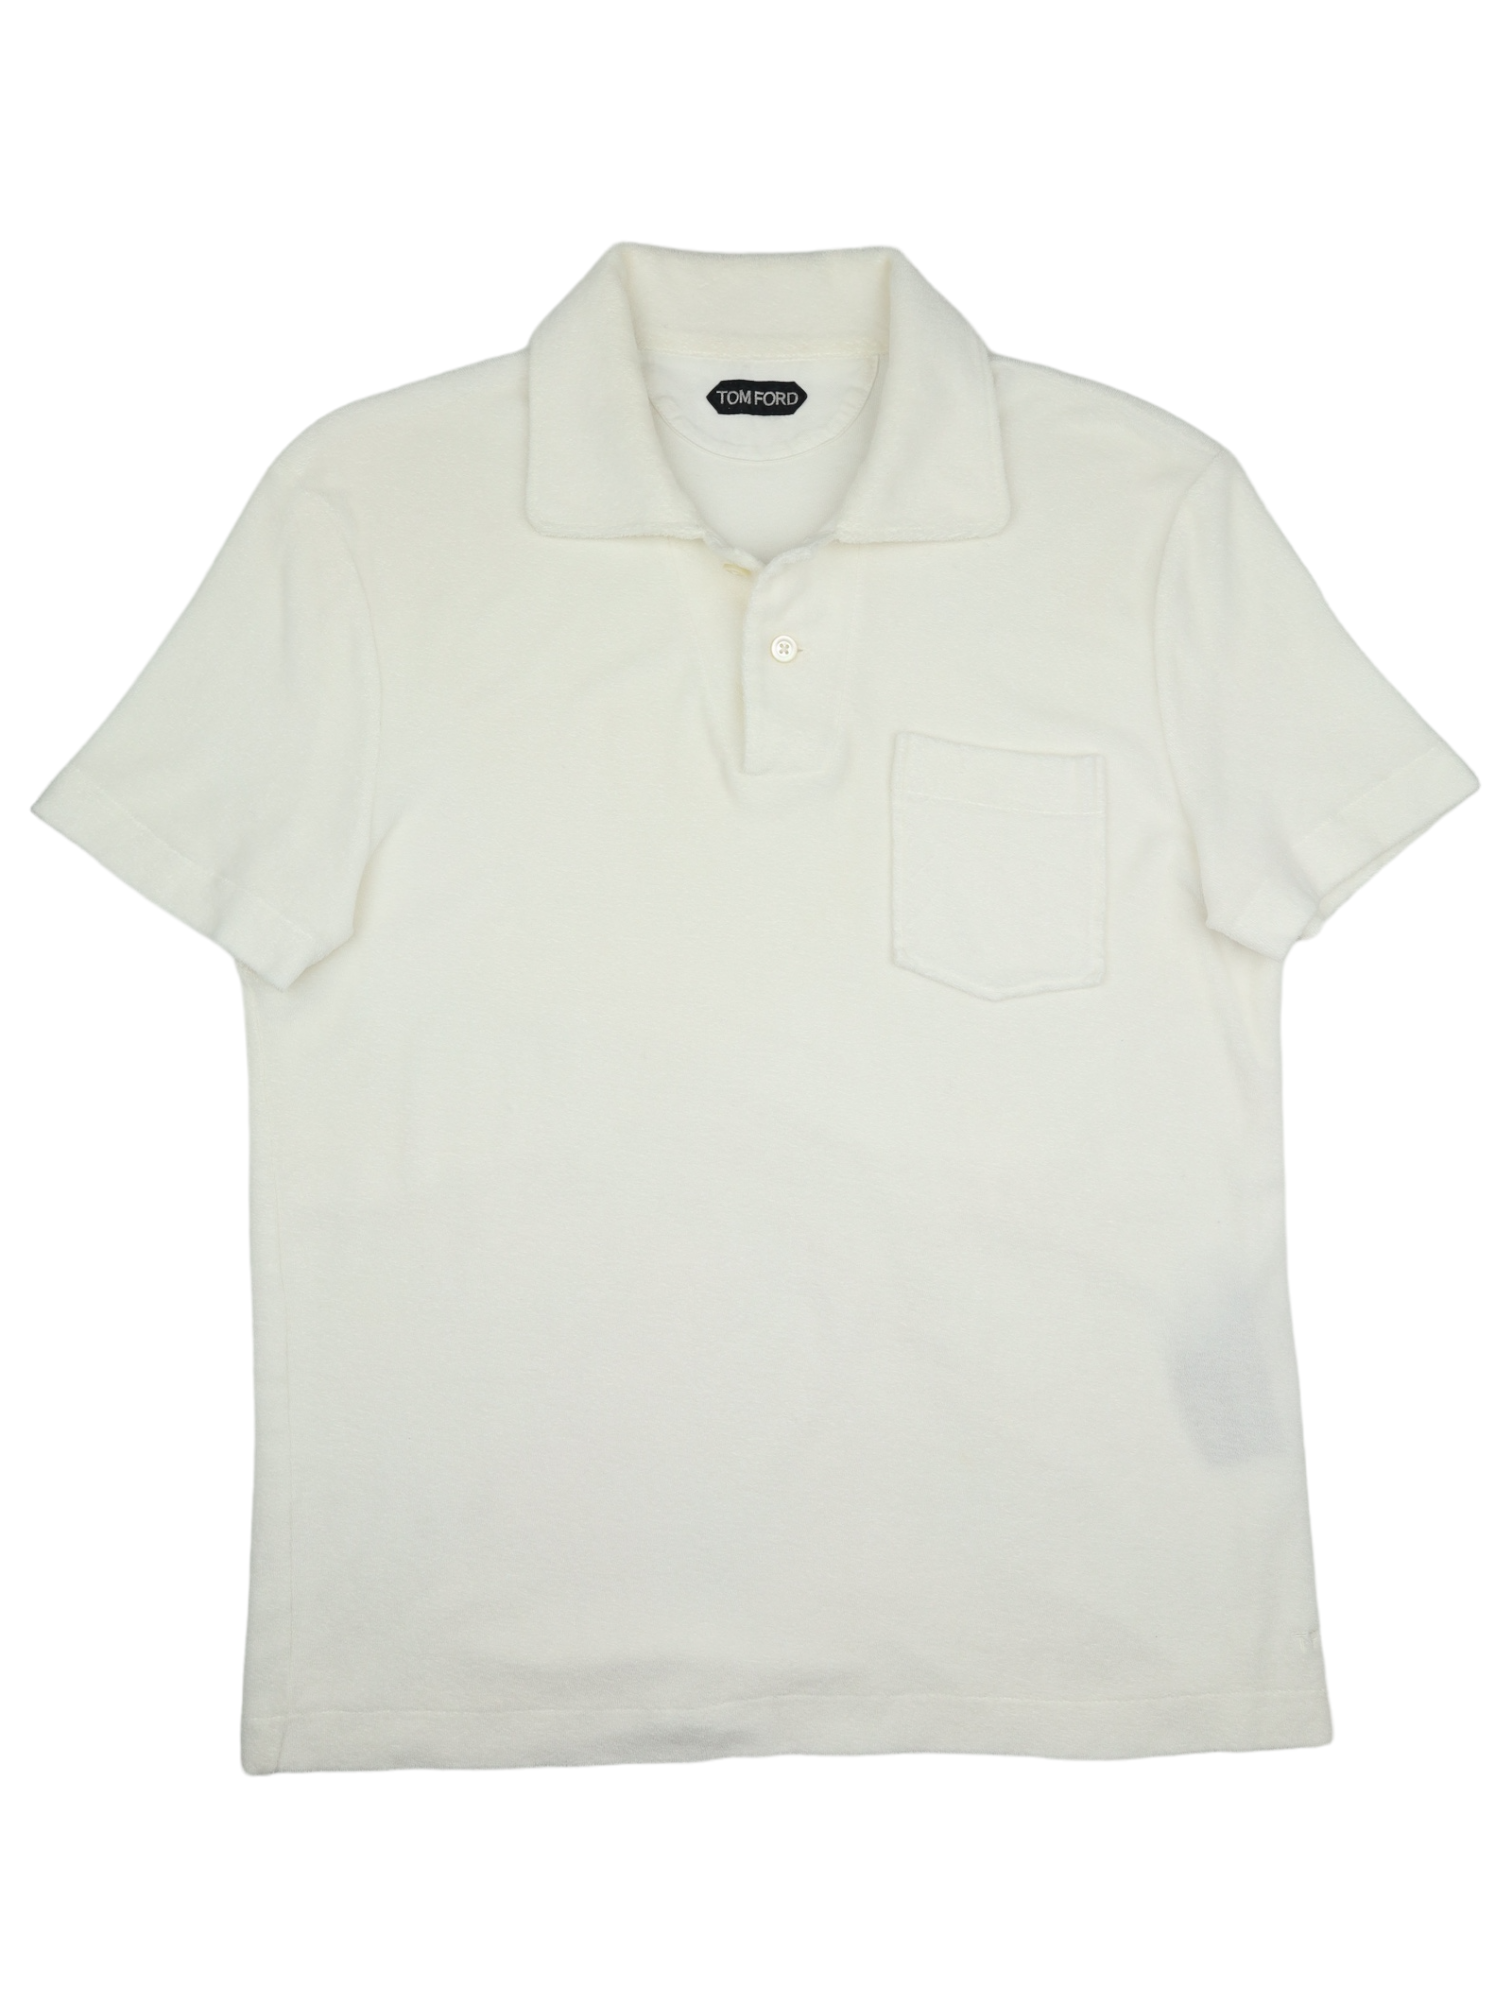 Tom Ford White Towelling Cotton Polo